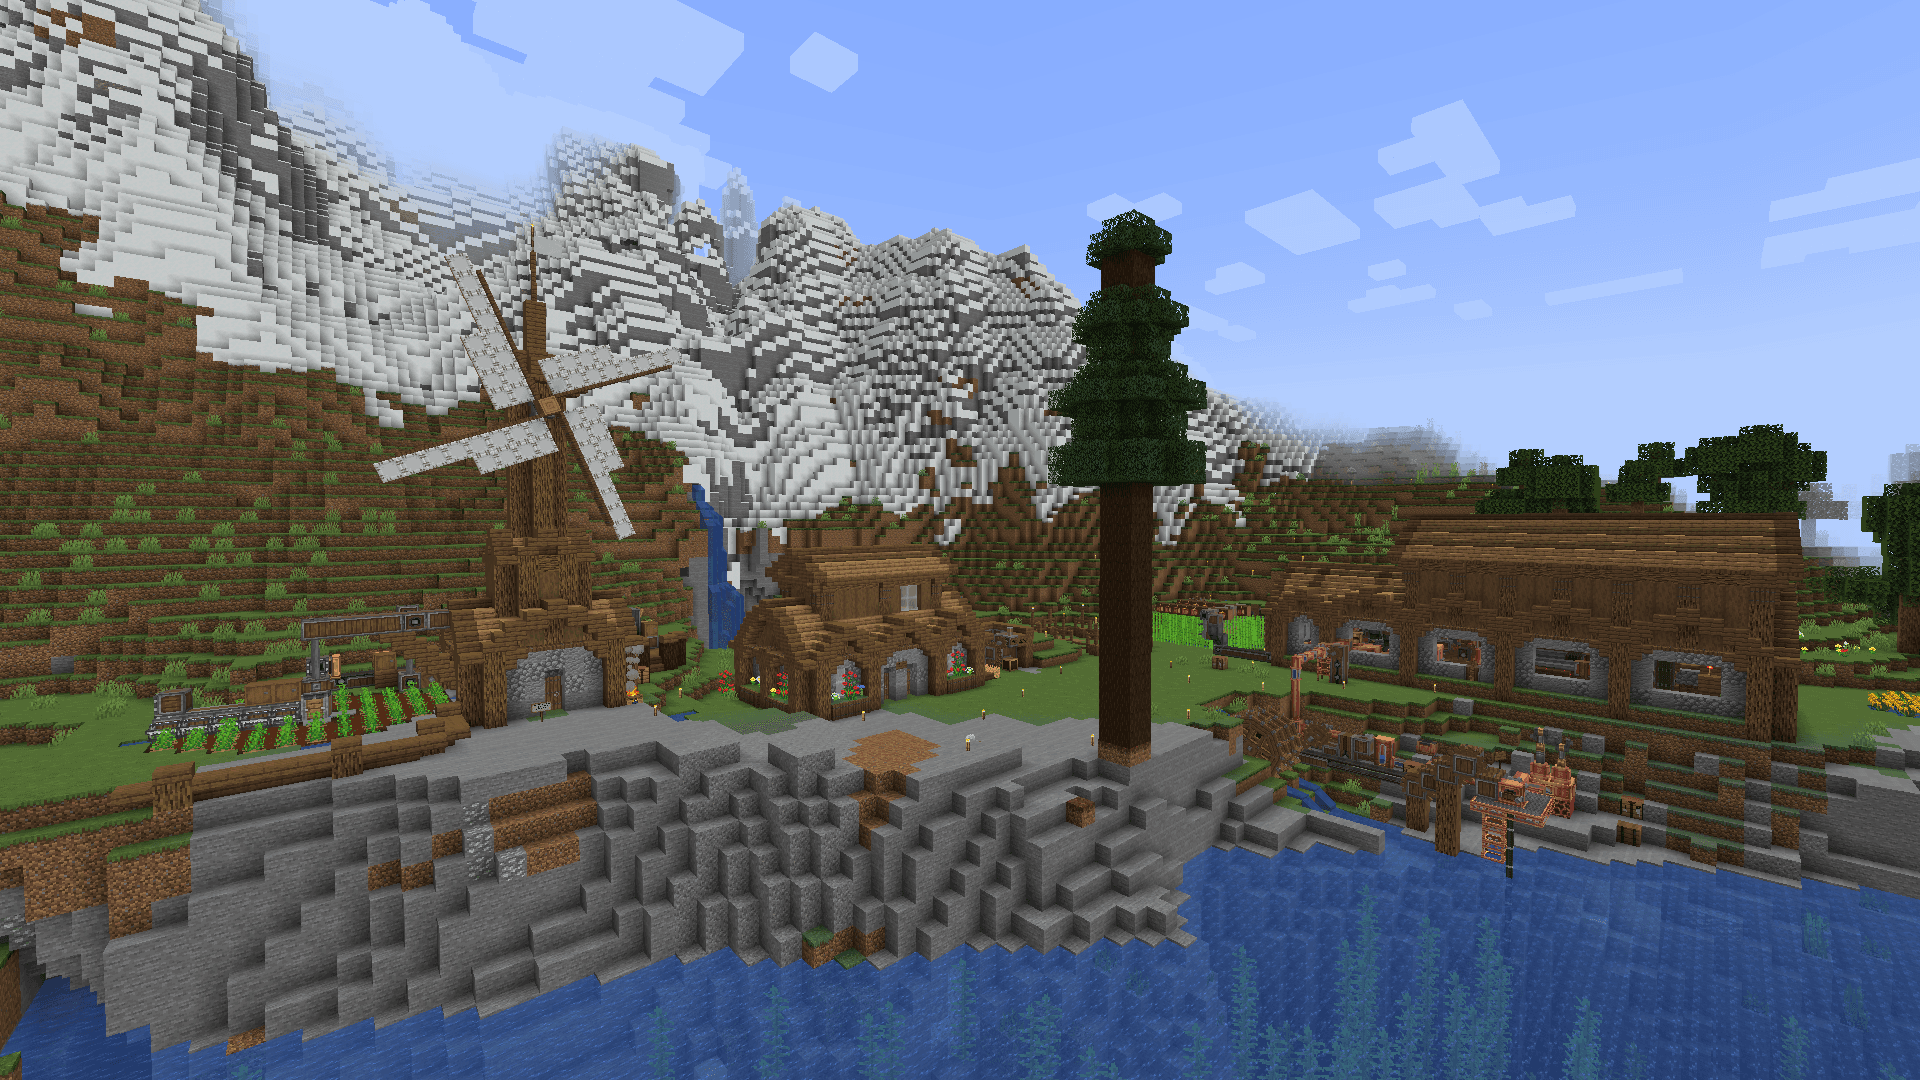 A screenshot from the server